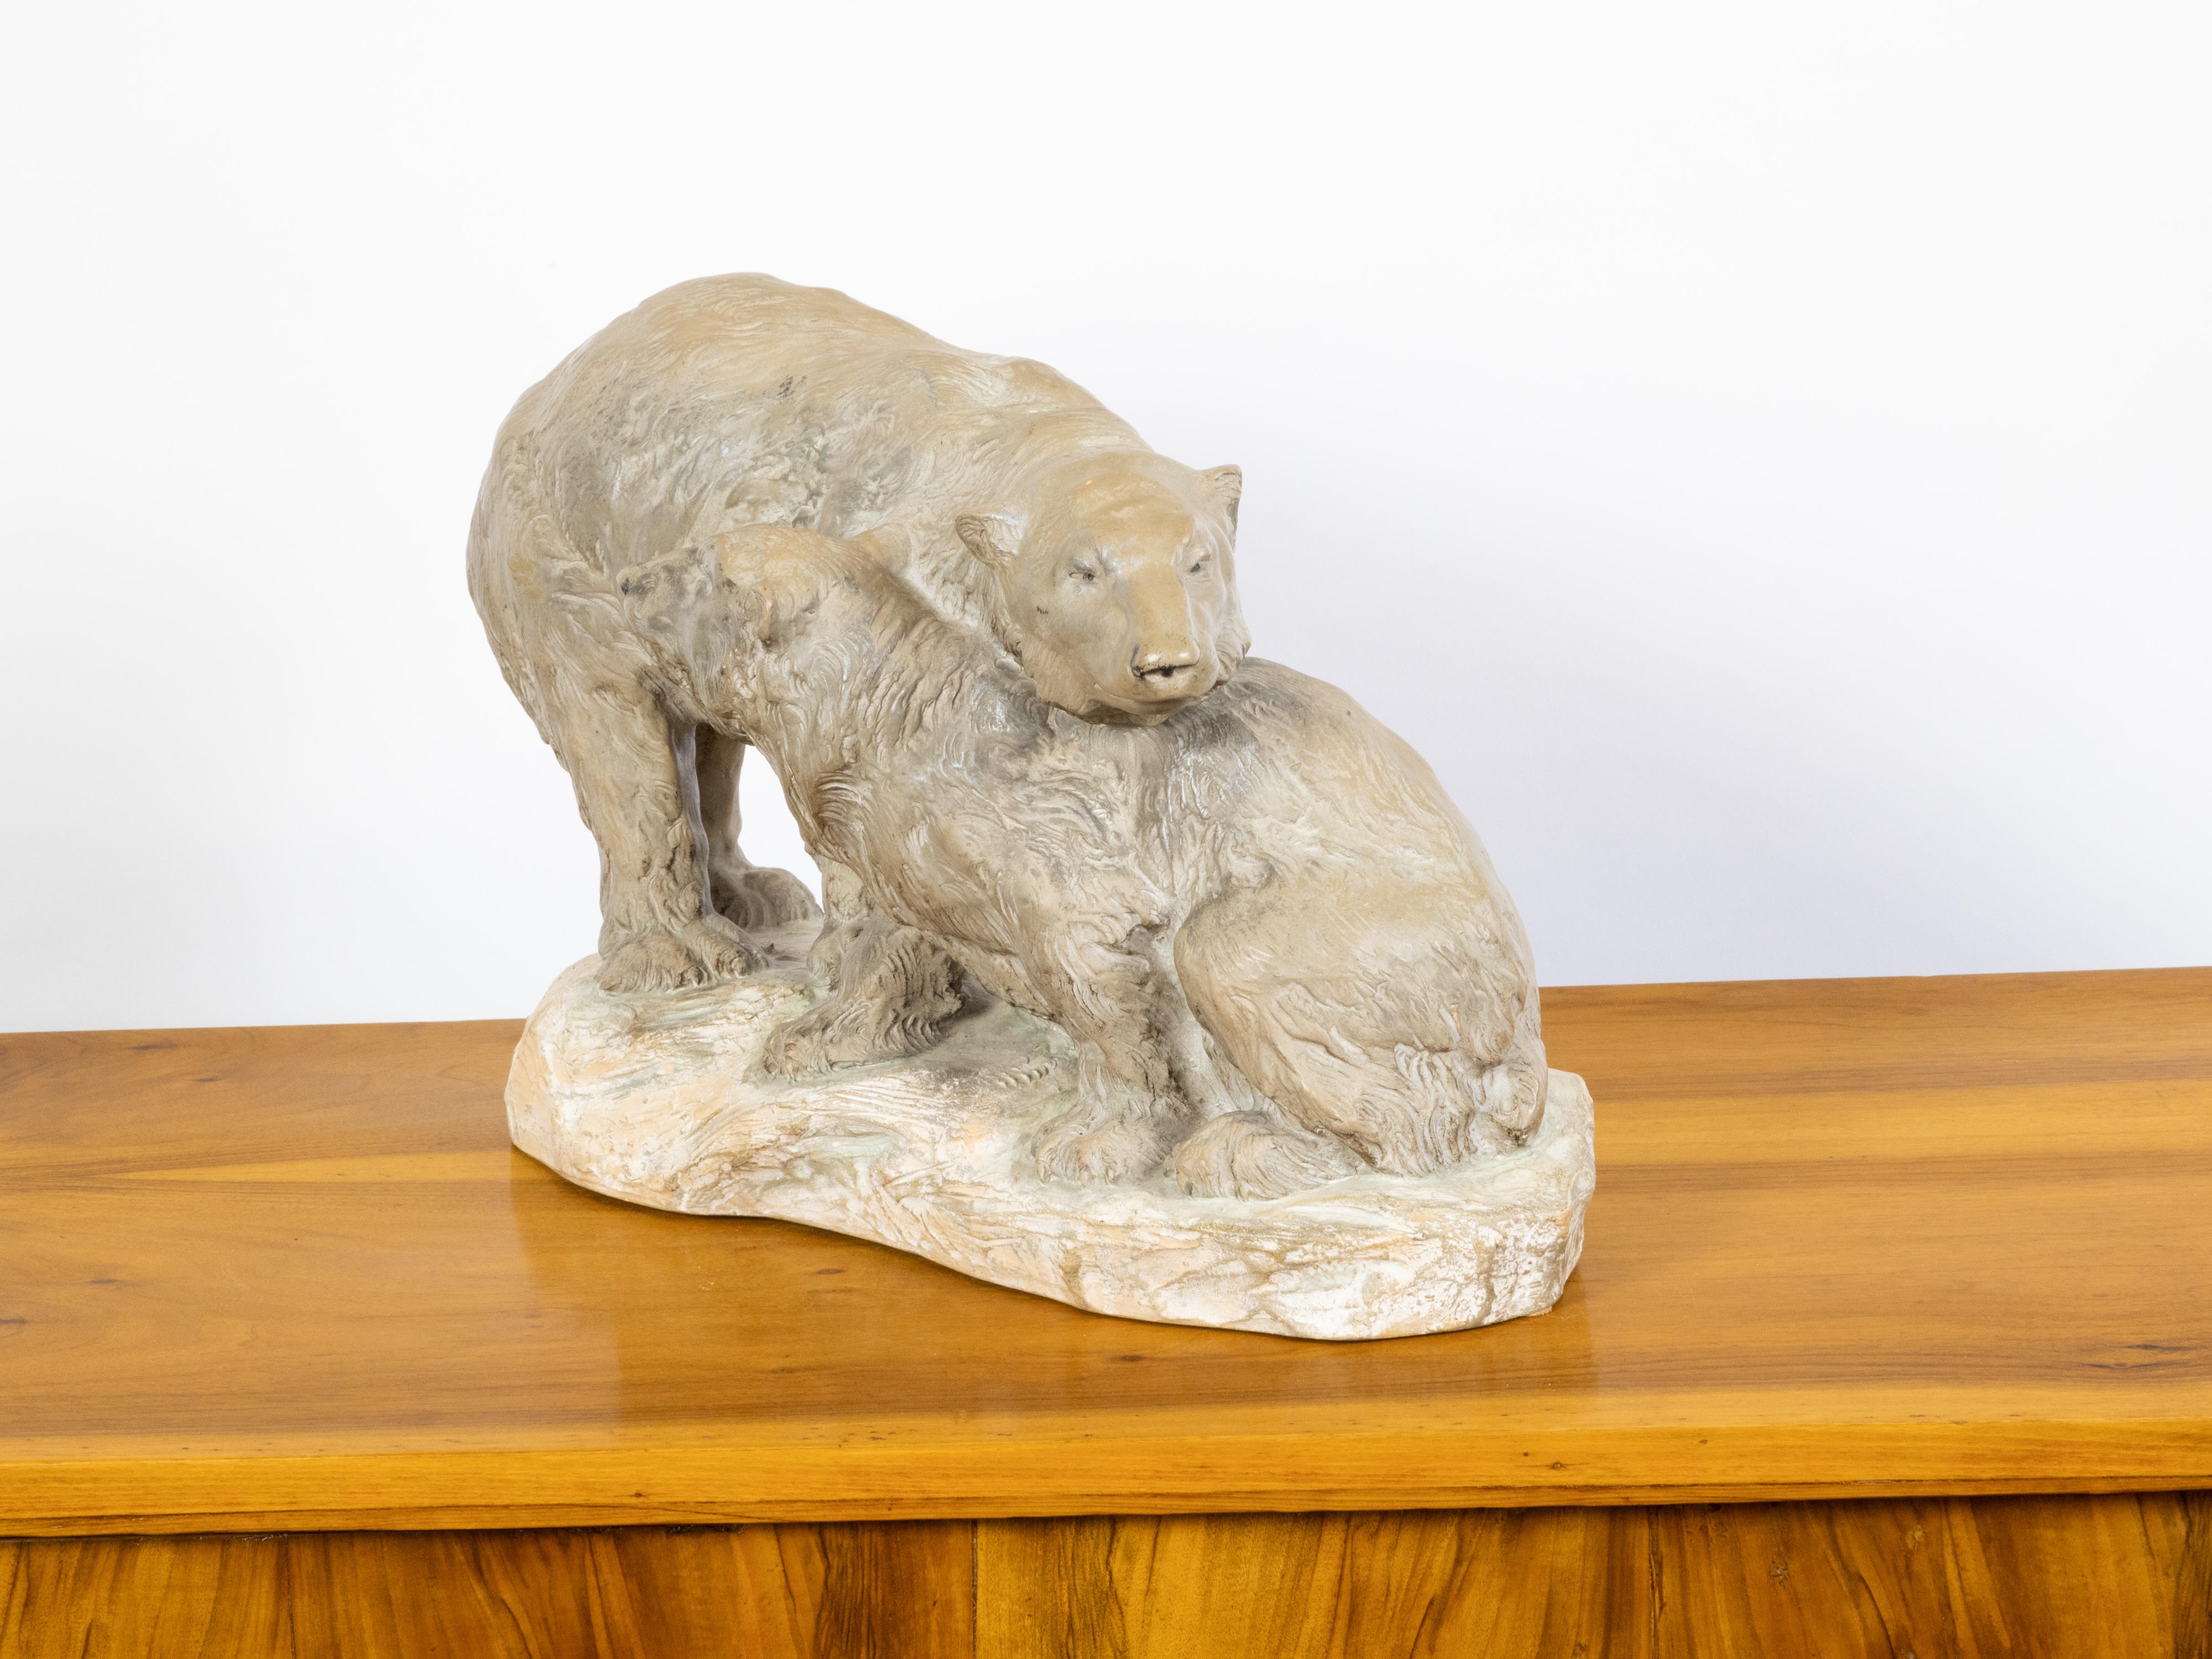 Continental Midcentury Terracotta Sculpture Depicting Two Bears on a Base For Sale 4